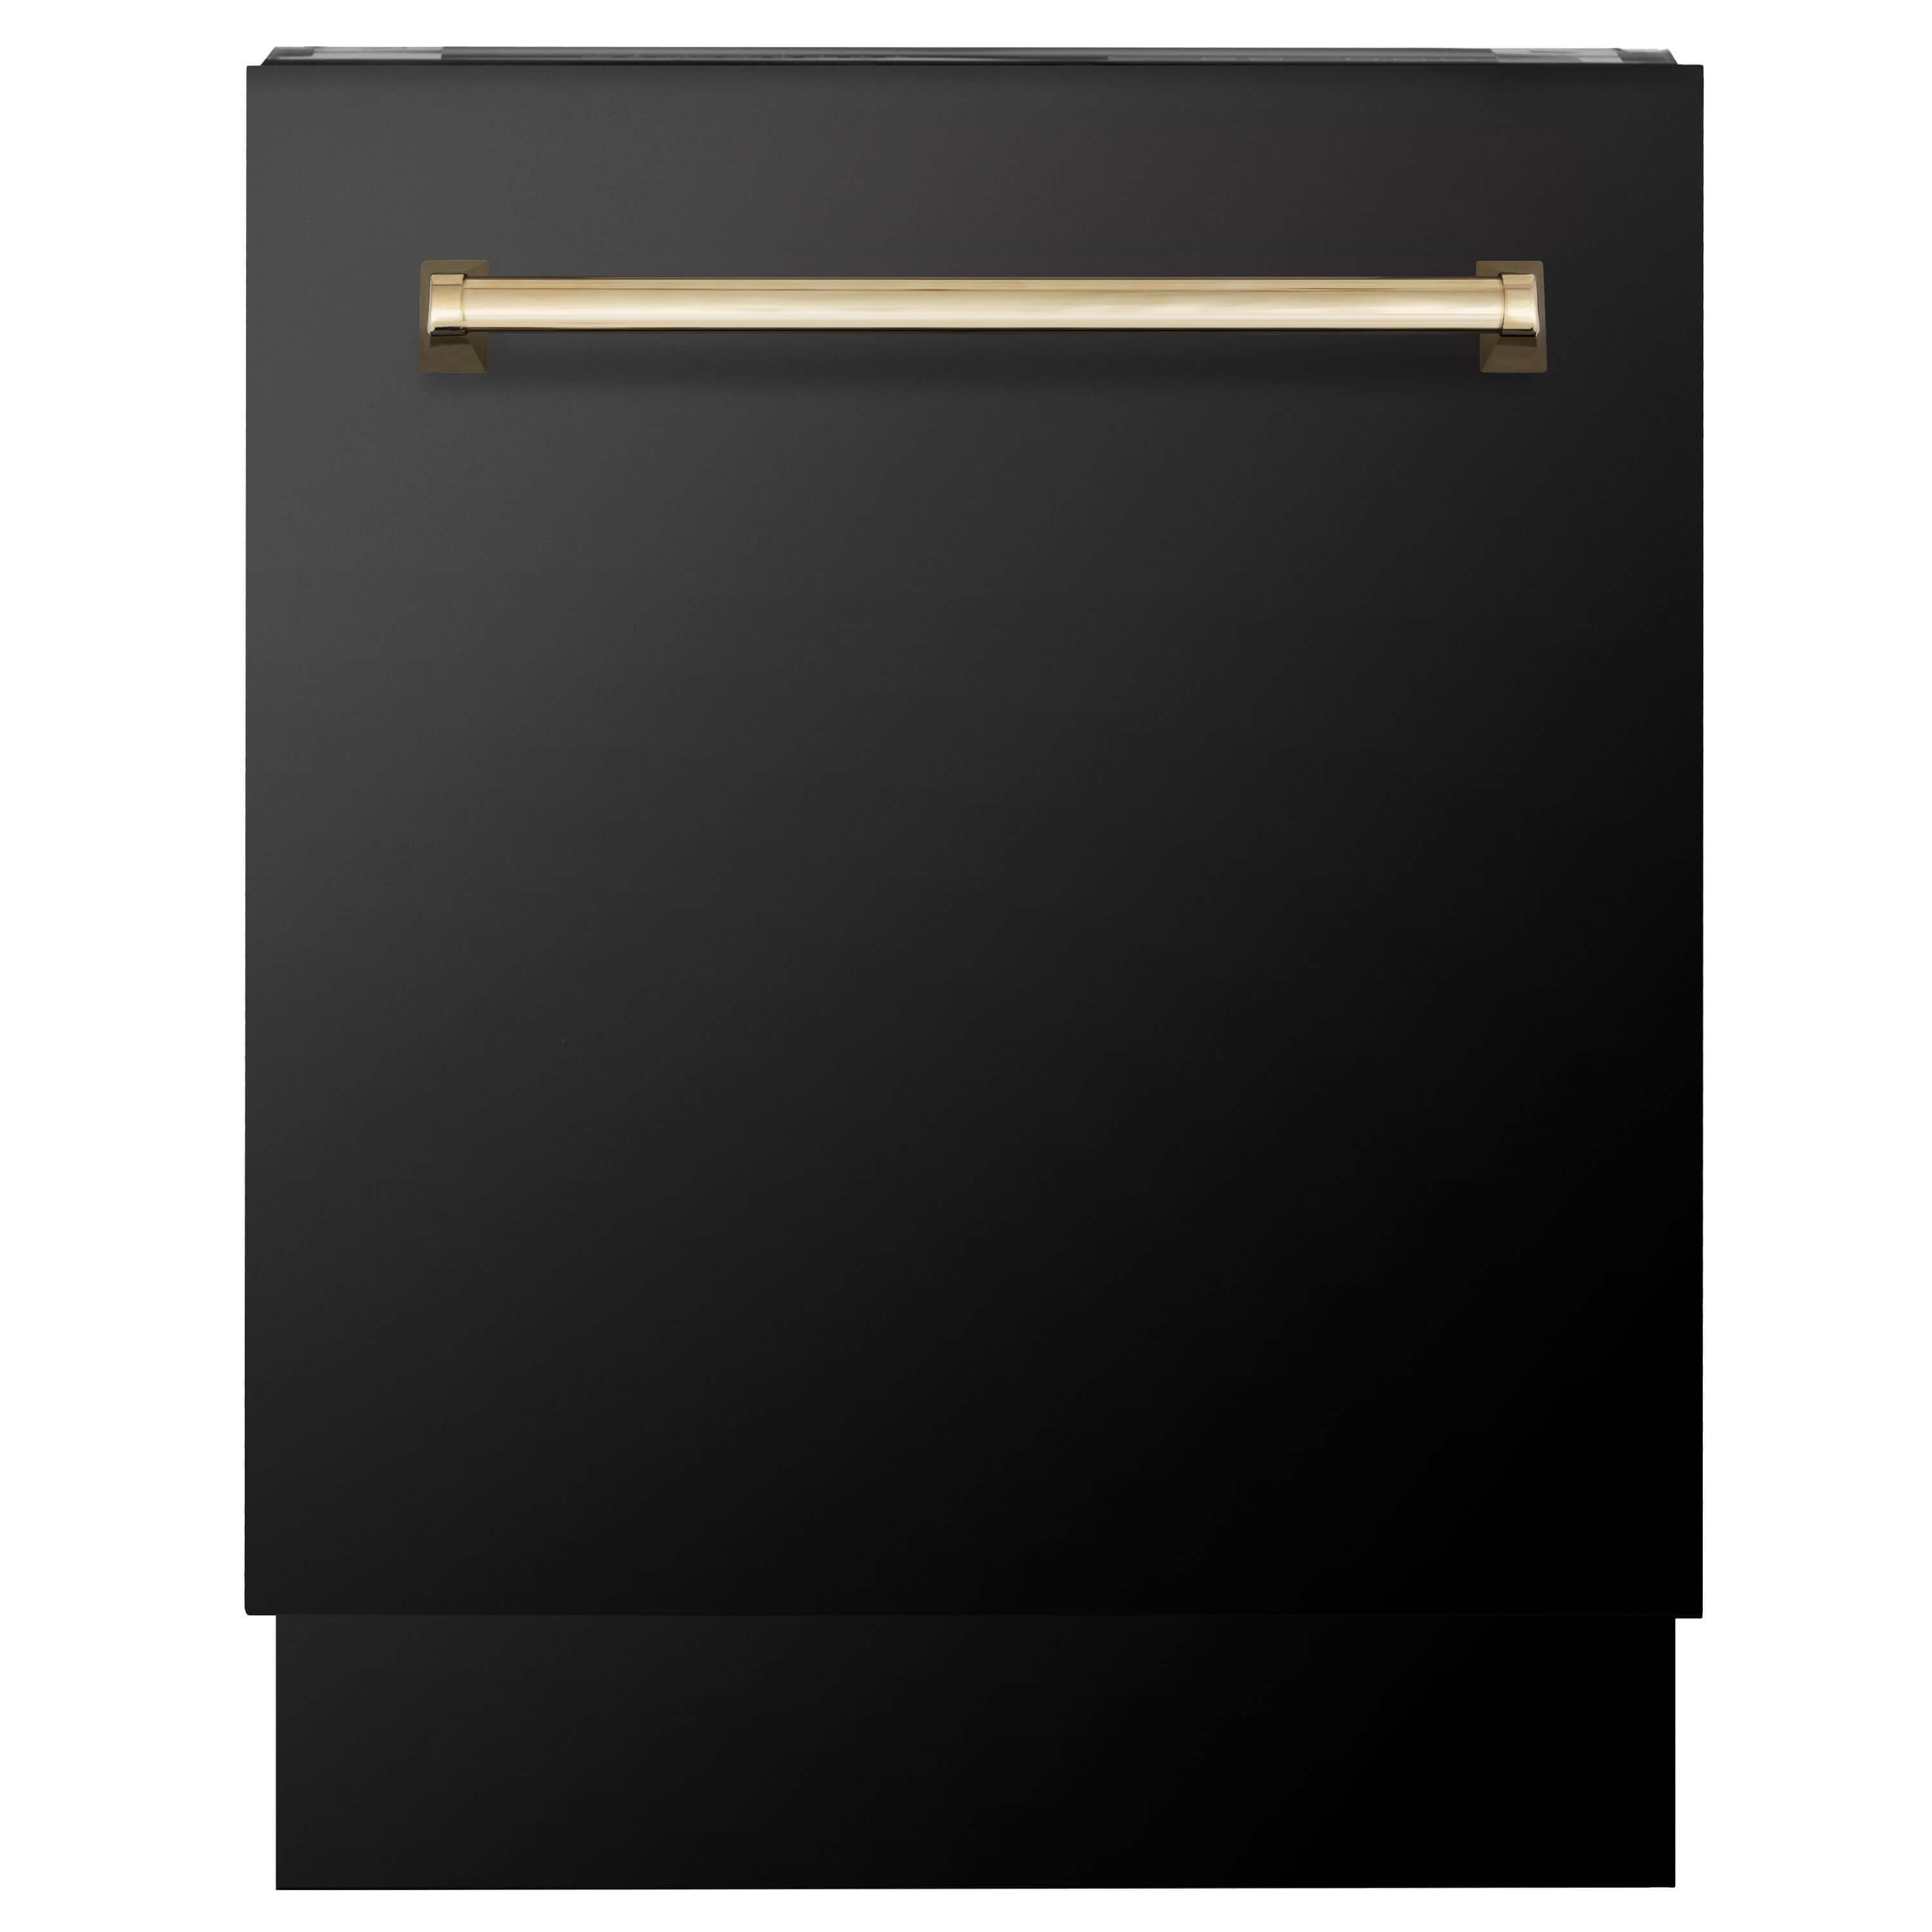 ZLINE Autograph Edition 24" Black Stainless Steel Dishwasher with Polished Gold handle (DWVZ-BS-24-G) side, door closed.